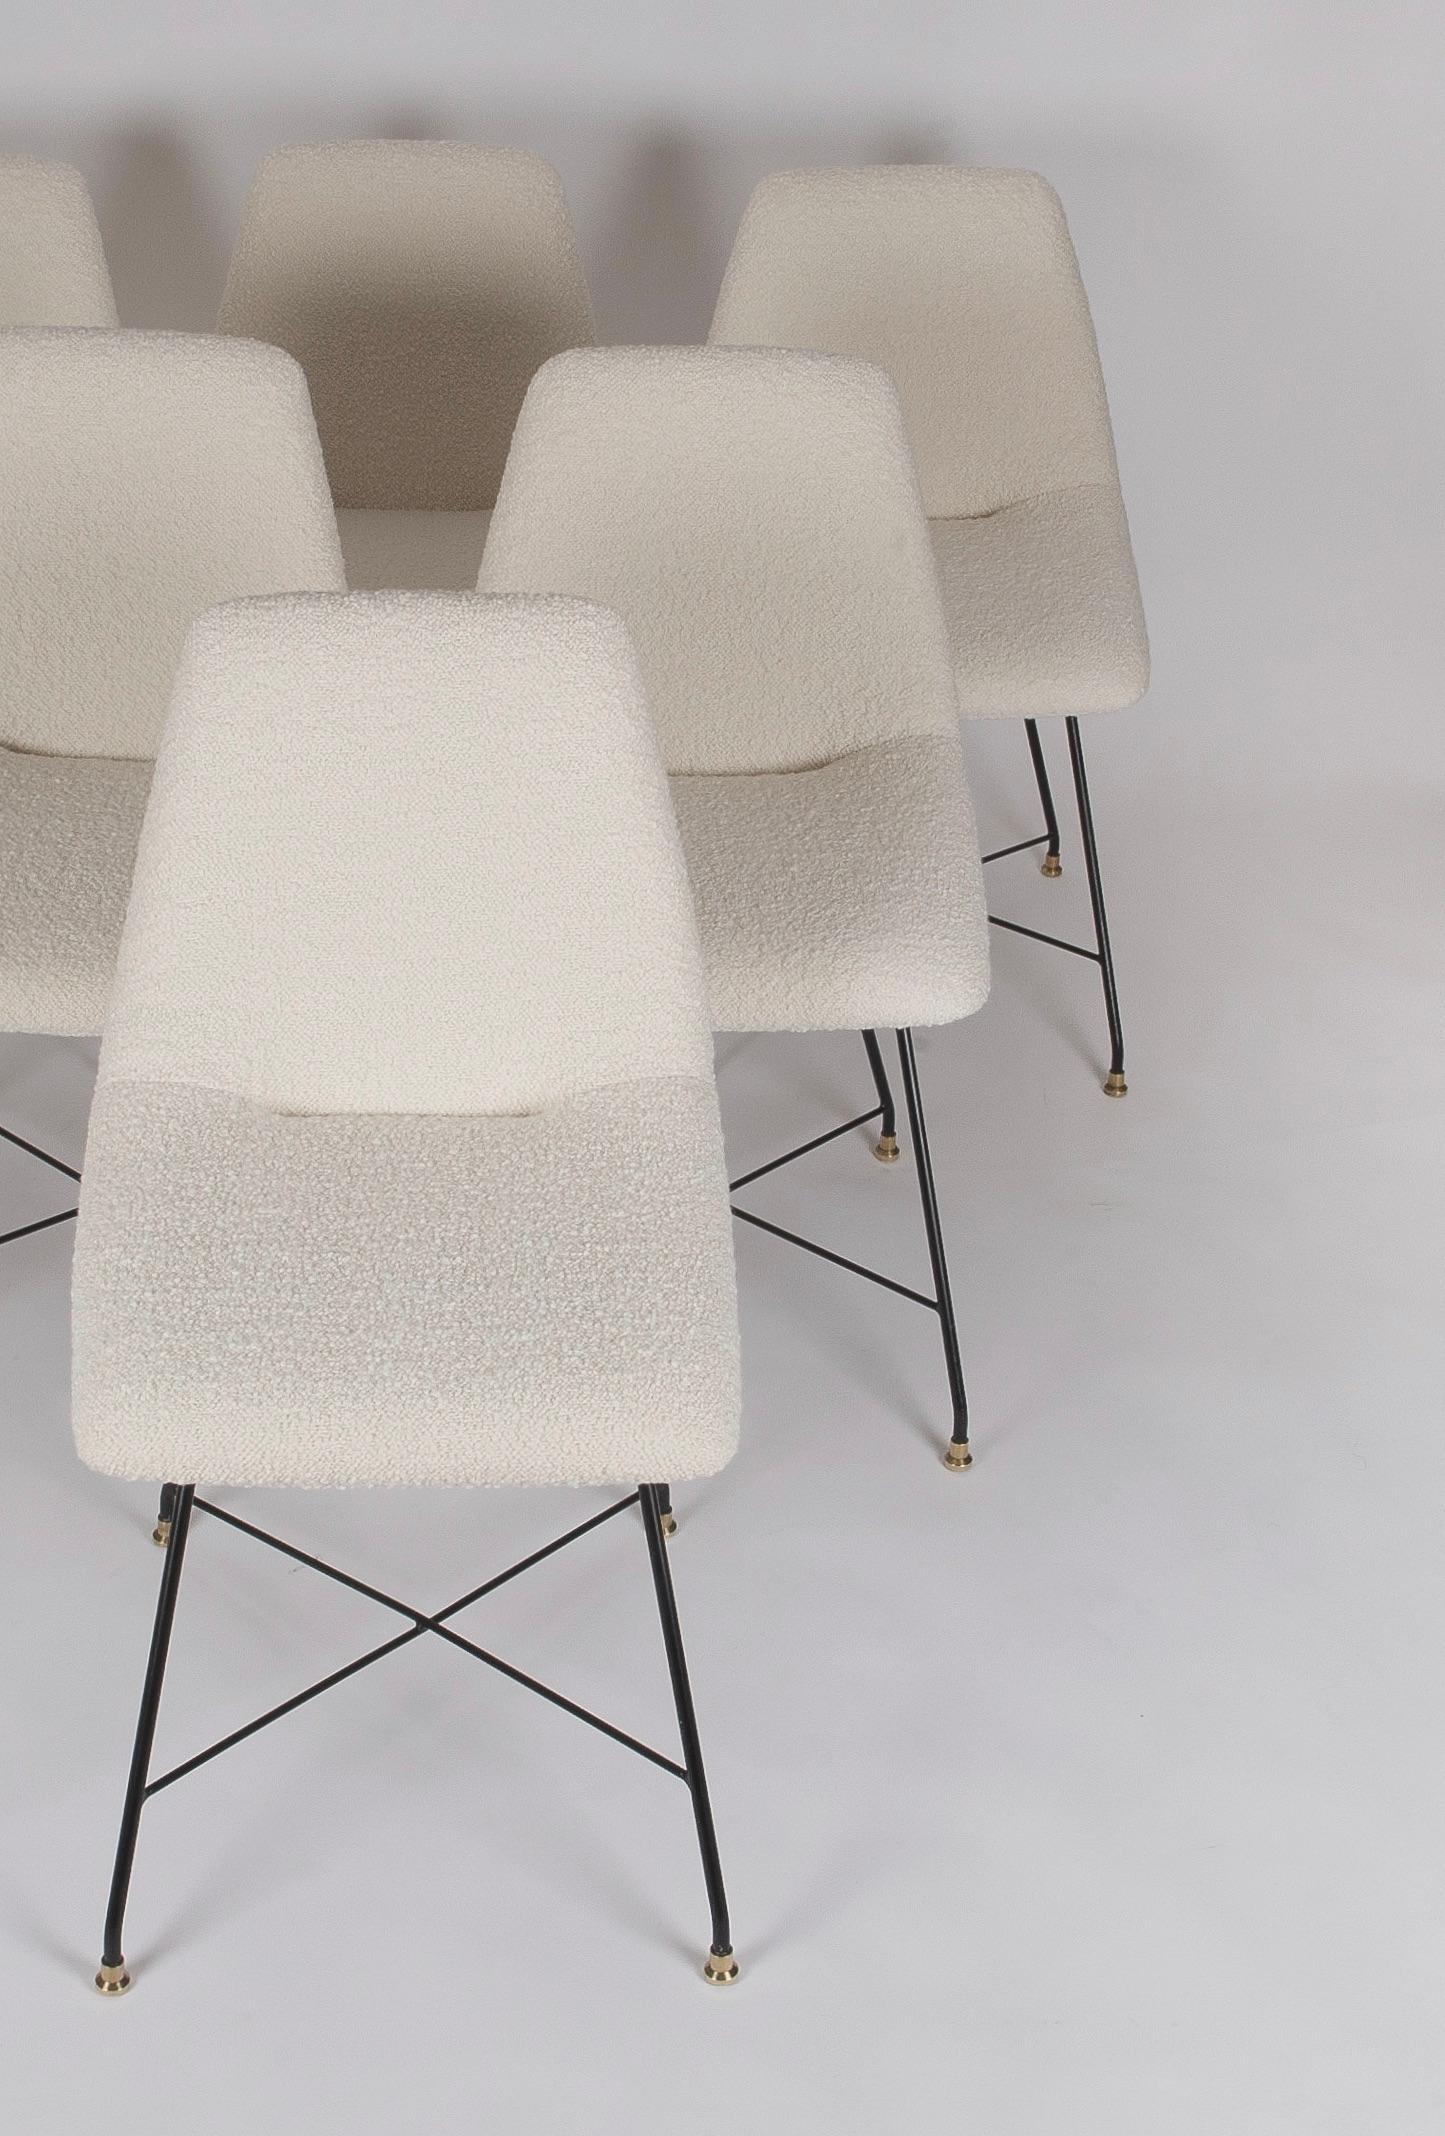 Set of Six Bouclé 'Aster' Chairs by Augusto Bozzi for Saporiti, Italy, C.1956 3